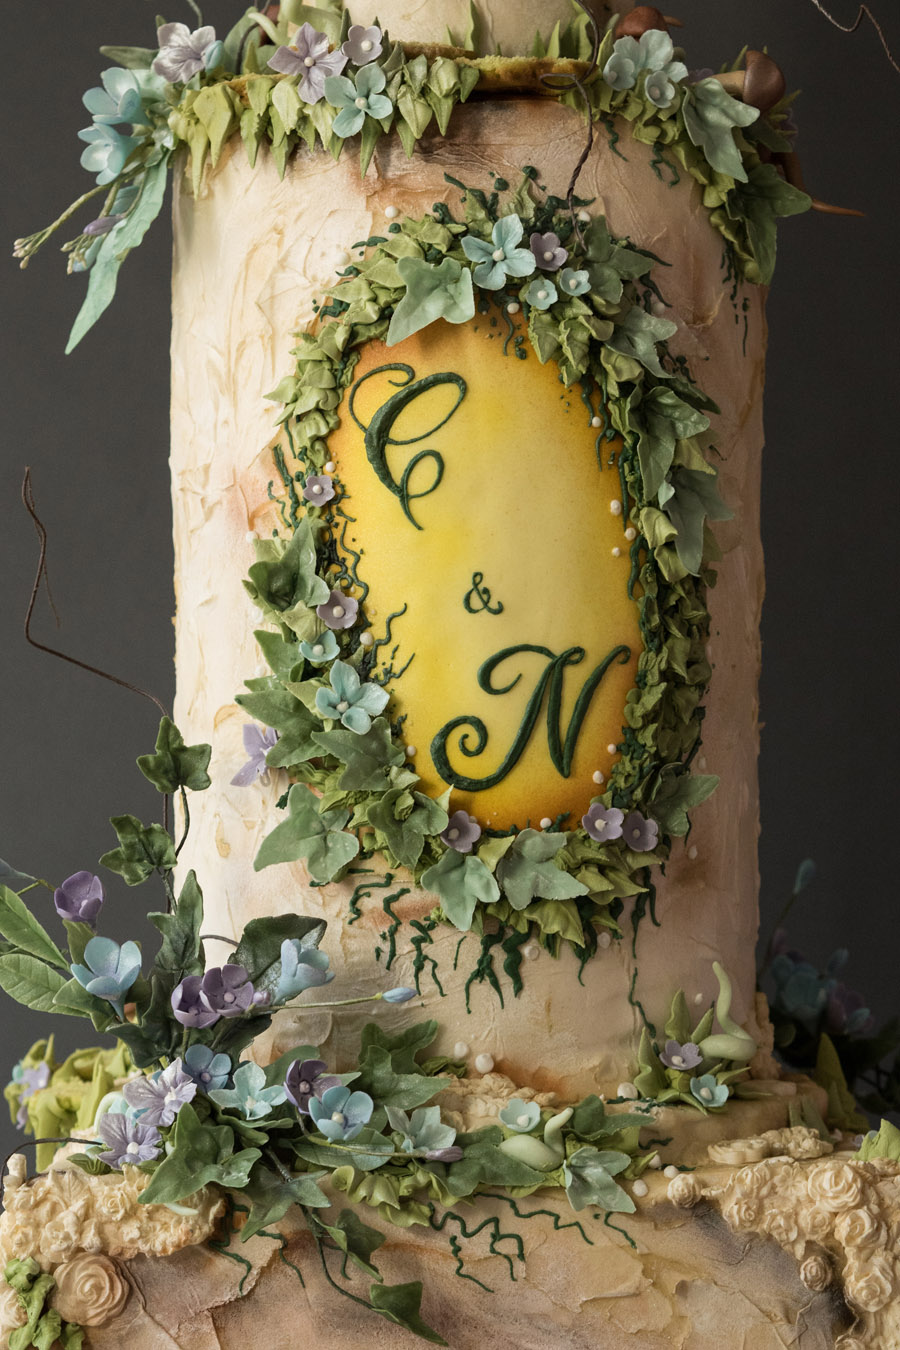 Beautiful wedding cakes by The Frostery - trends and ideas for 2019 (11)